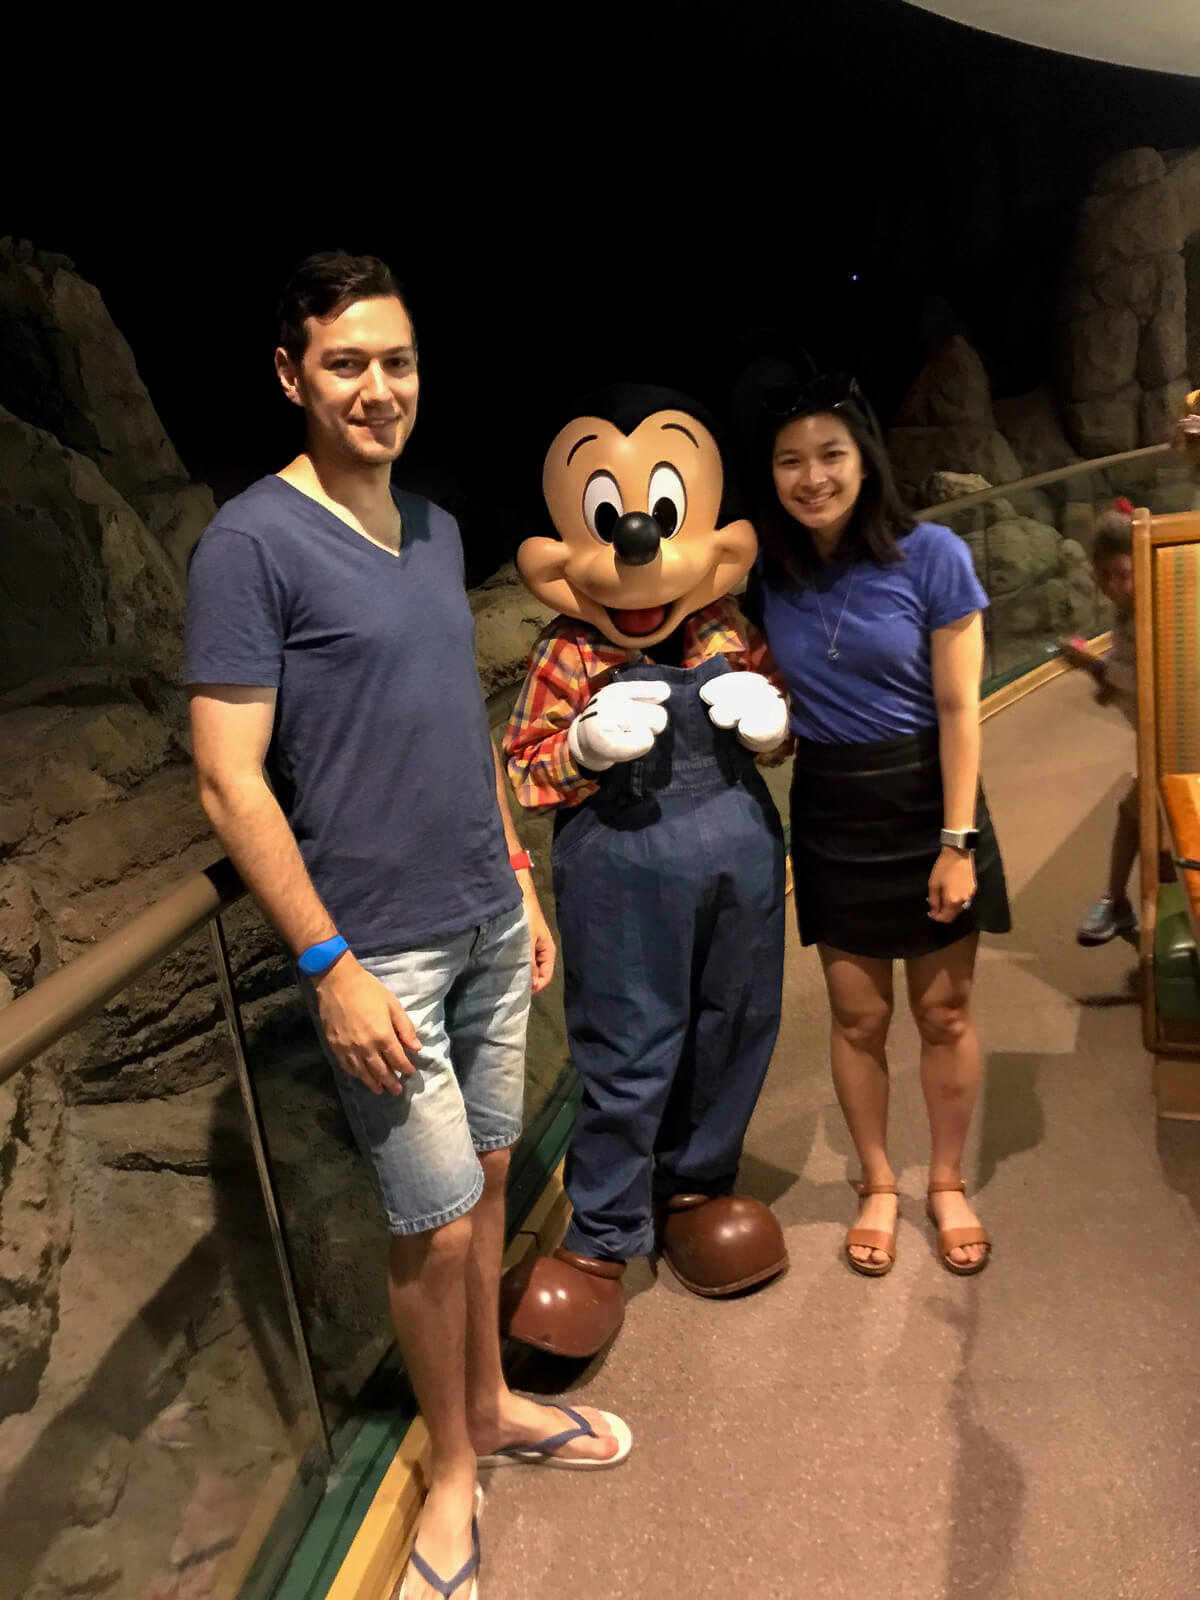 A man and woman standing alongside someone dressed as the character Mickey Mouse dressed in overalls